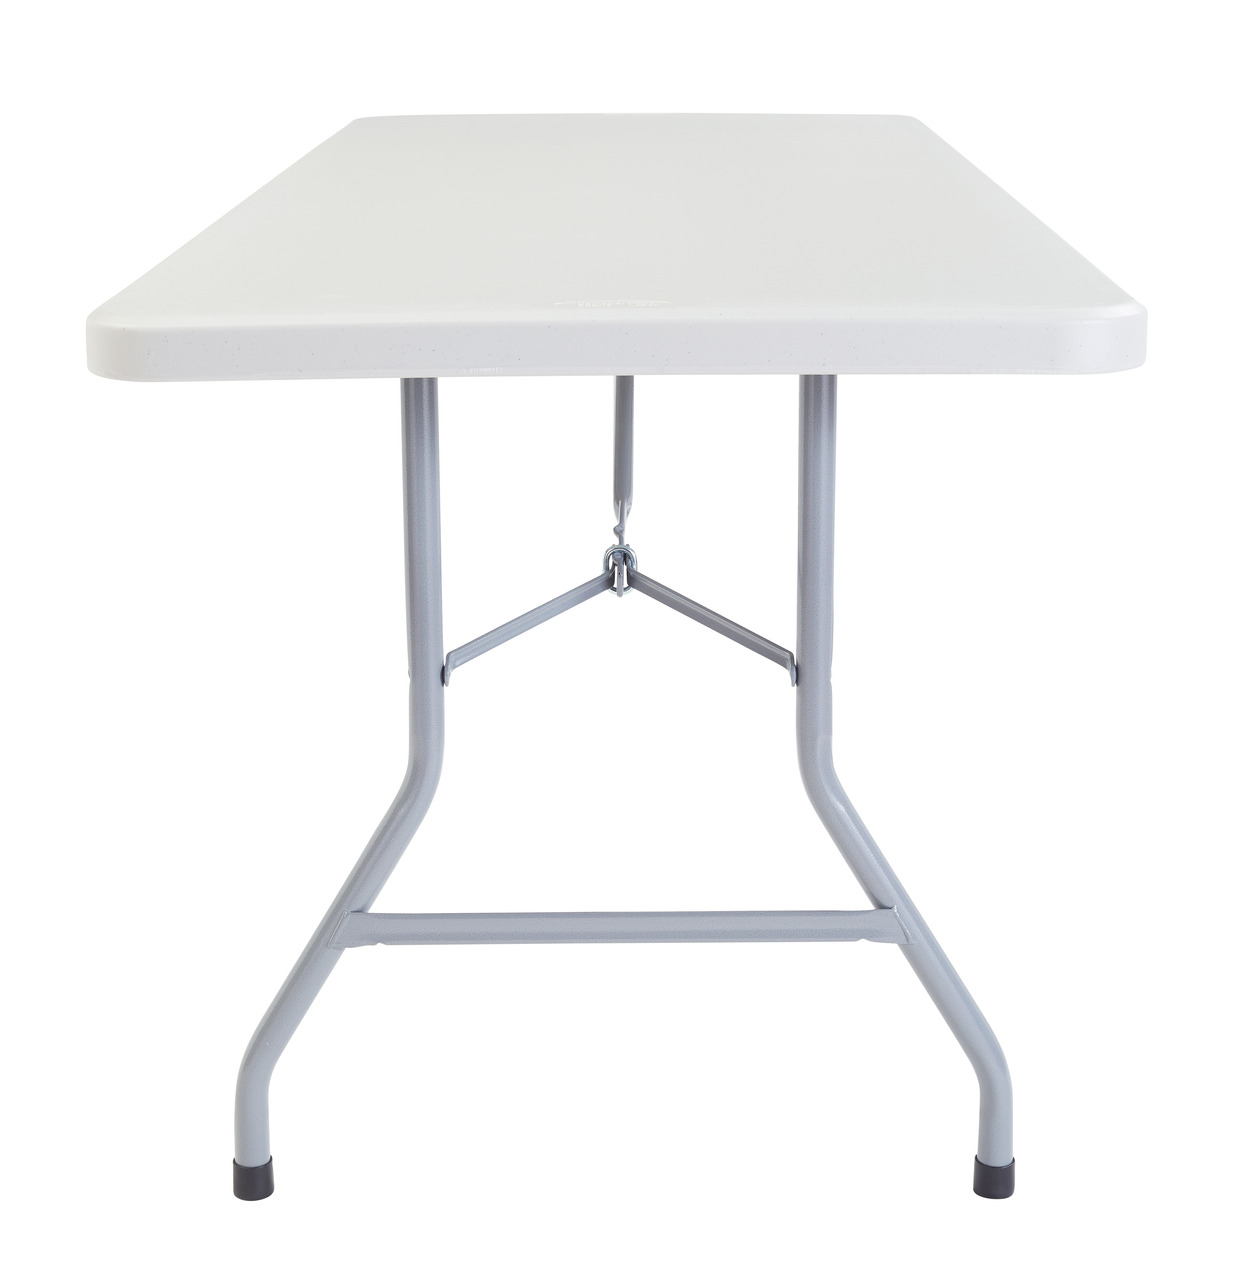 NPS 30" x 96" Heavy Duty Folding Table - Speckled Gray Top and Grey Frame